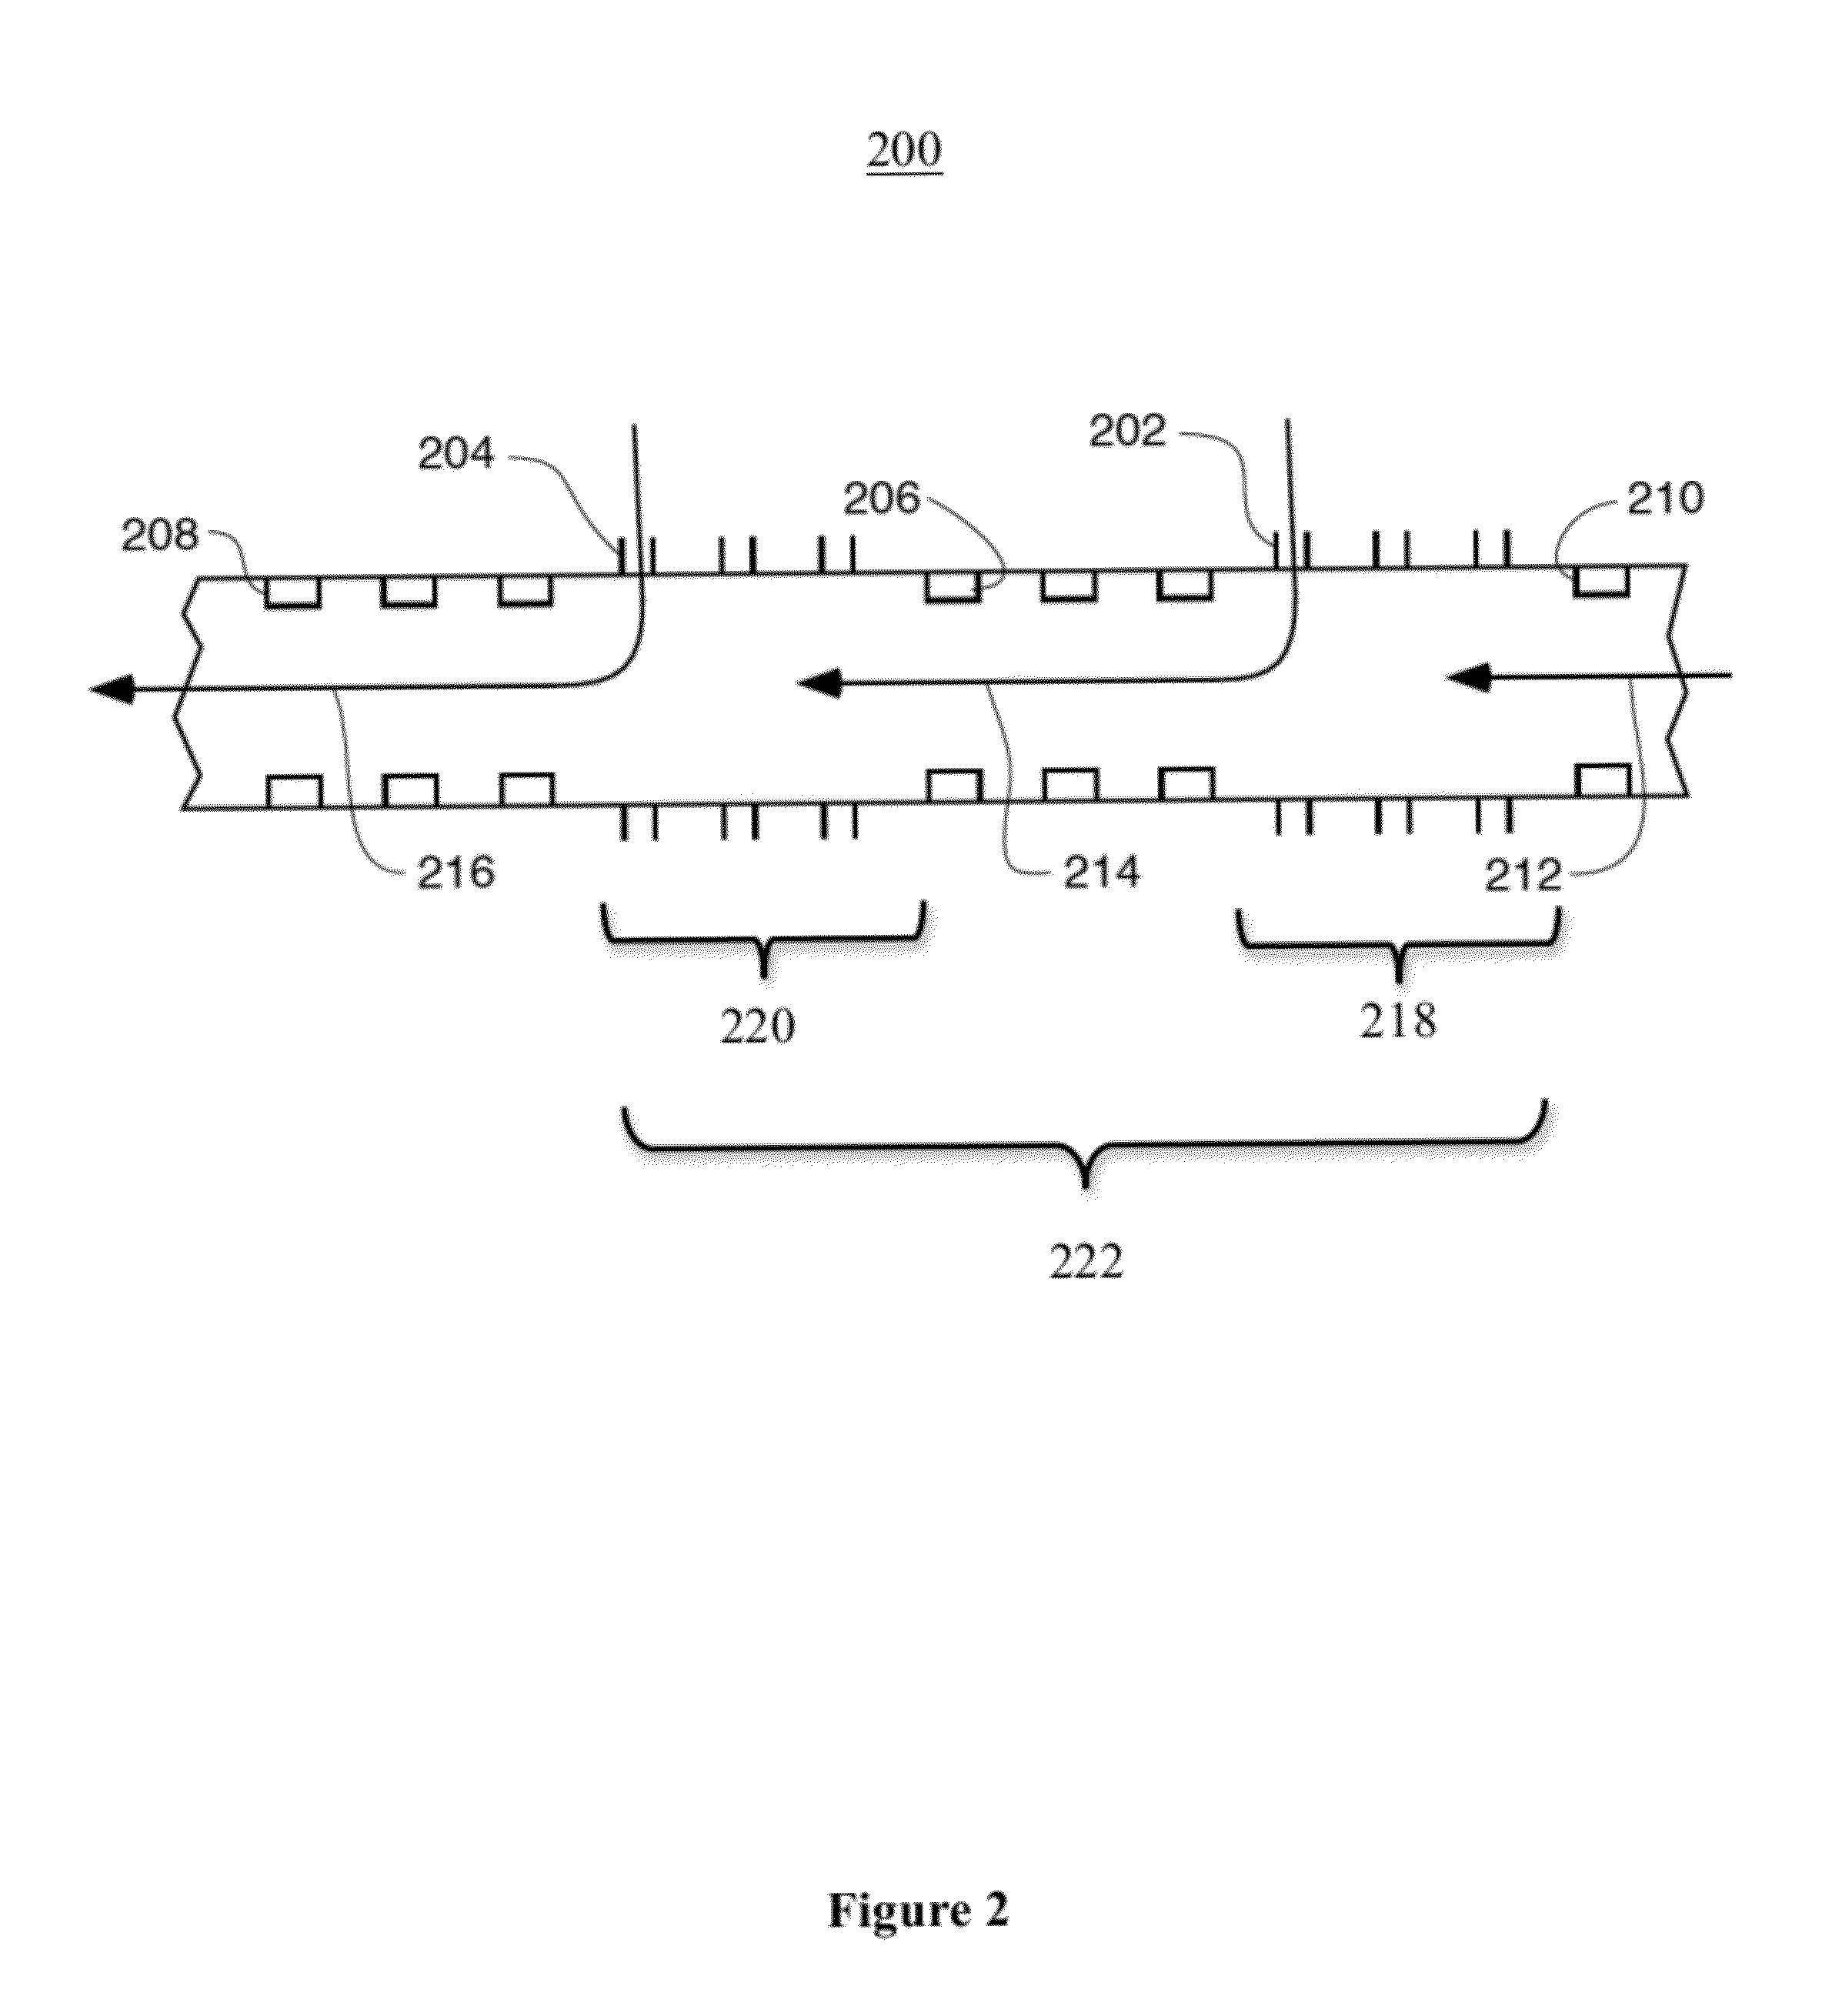 Systems and methods for monitoring groundwater, rock, and casing for production flow and leakage of hydrocarbon fluids